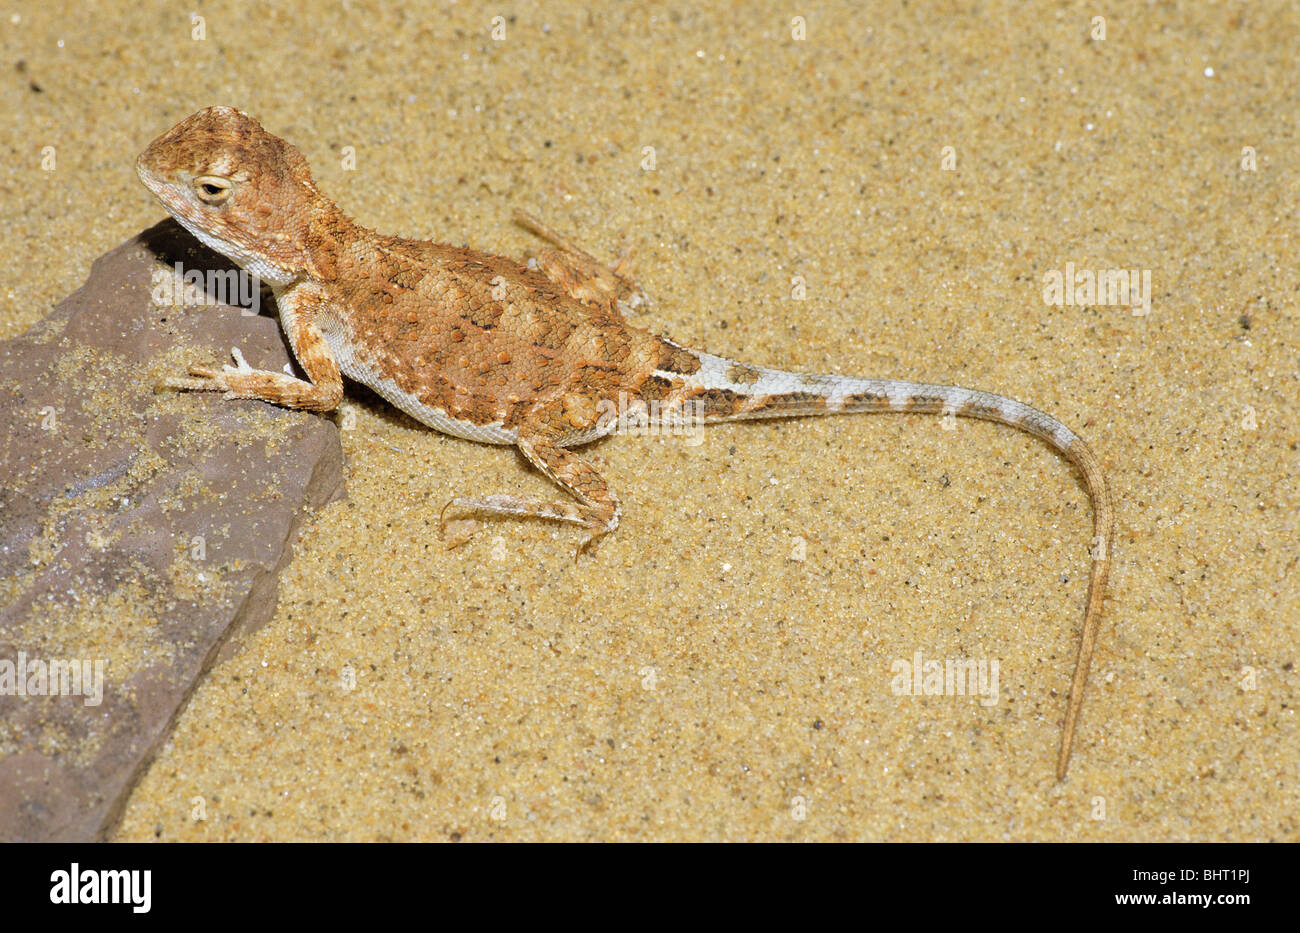 Long Tailed Earless Dragon in the sand / Tympanocryptis tetraporophora Stock Photo